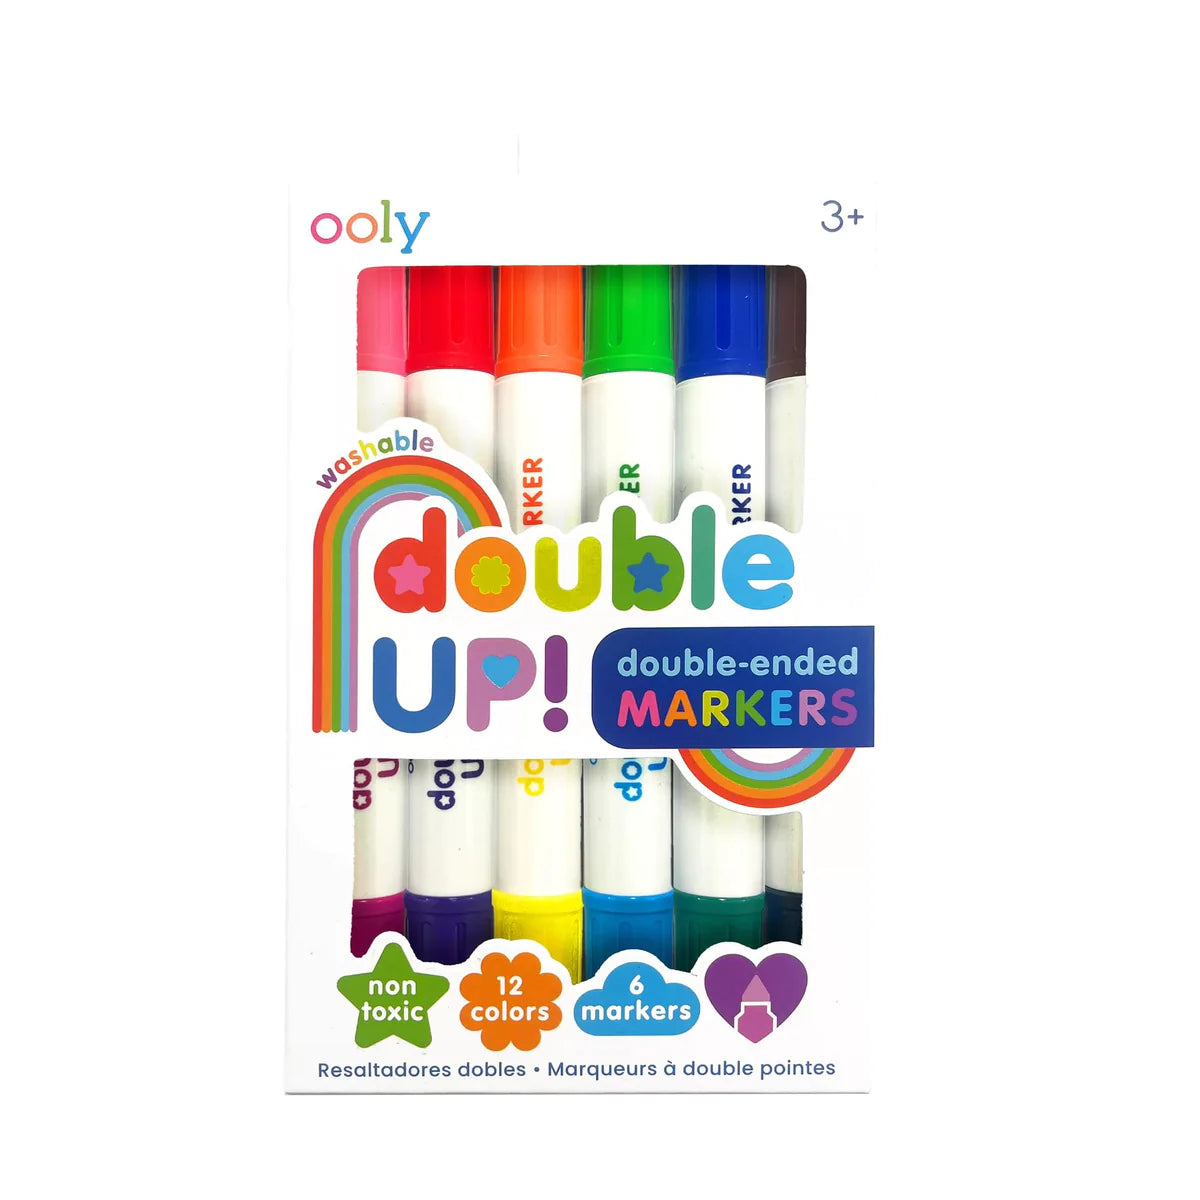 Ooly Double Up! Double Ended Marker Set